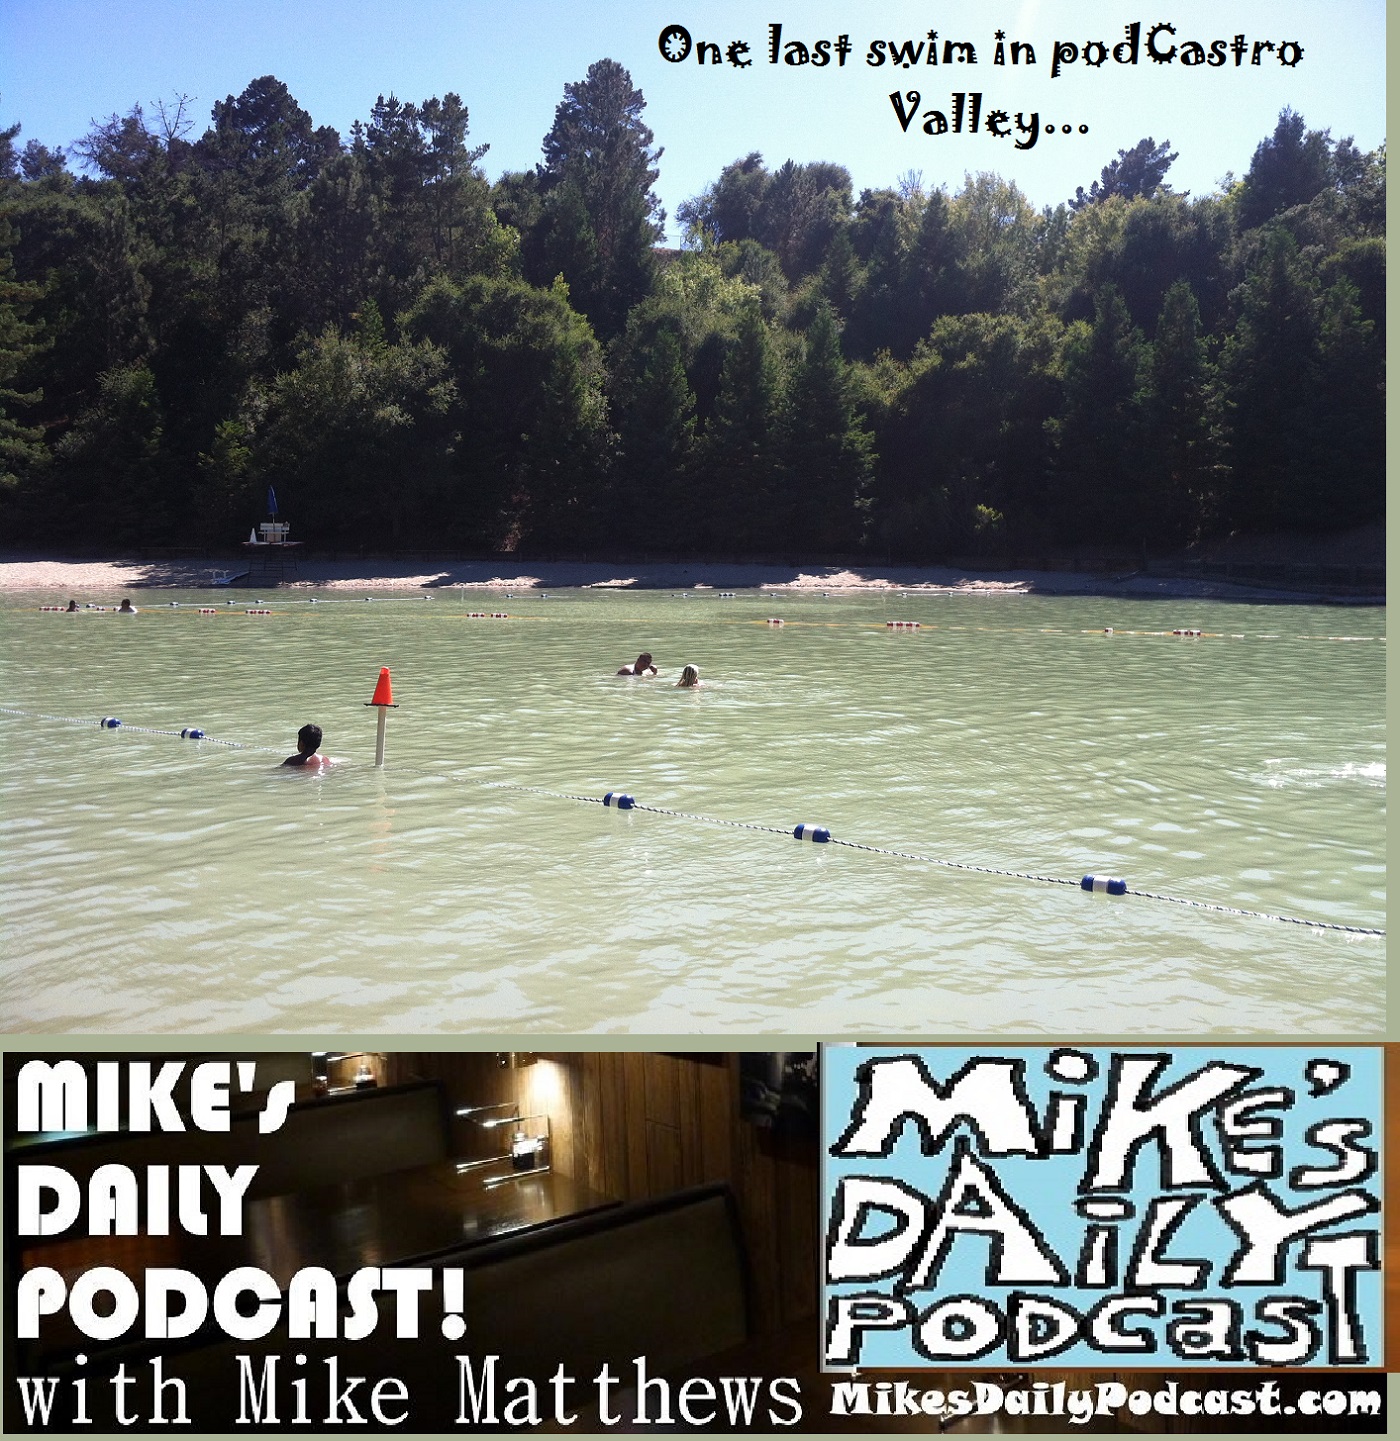 MIKEs DAILY PODCAST 1167 Cull Canyon swim area